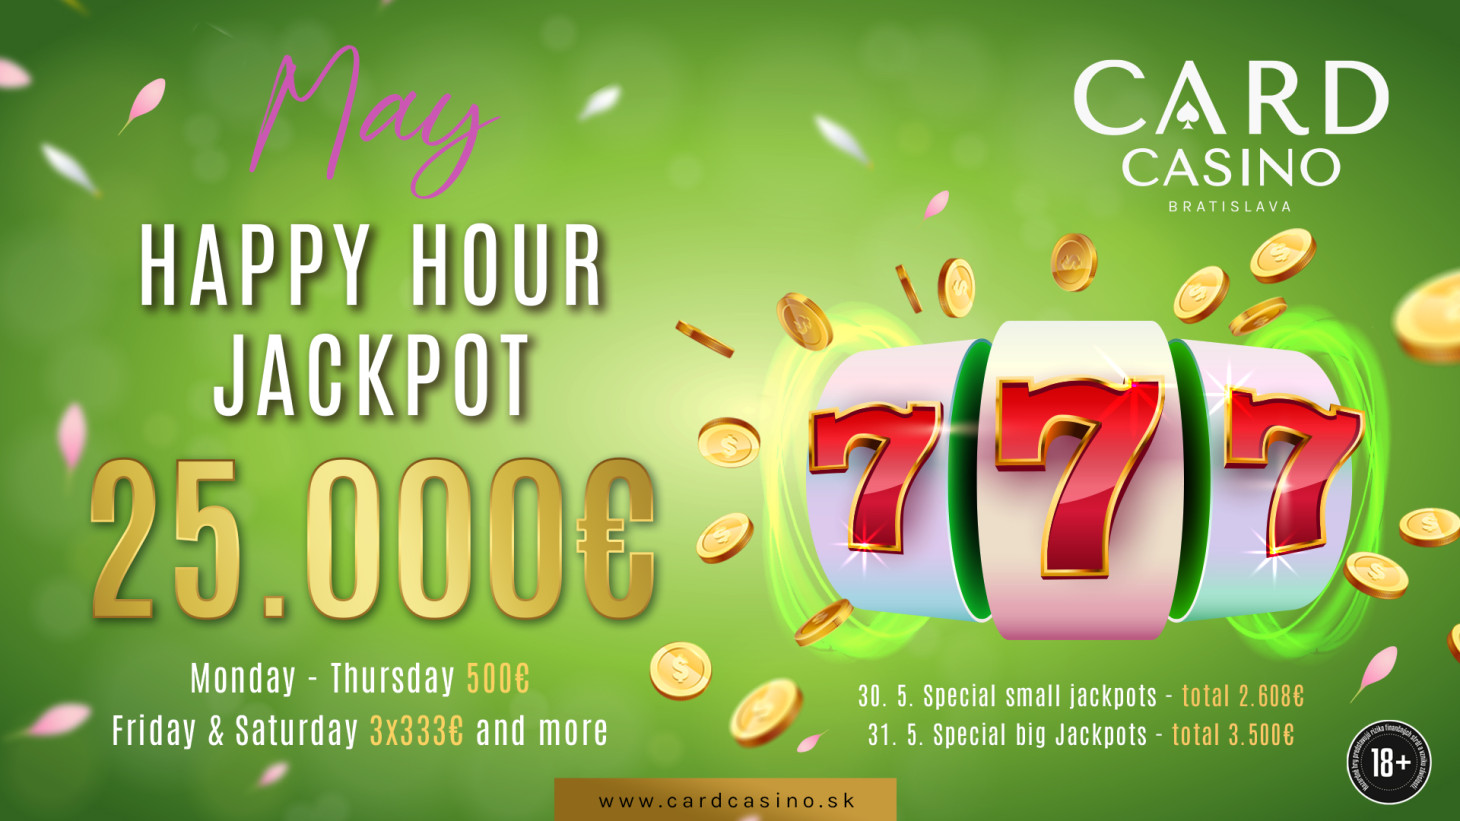 The May Happy Hour Jackpot will delight with €25,000 worth of prizes!